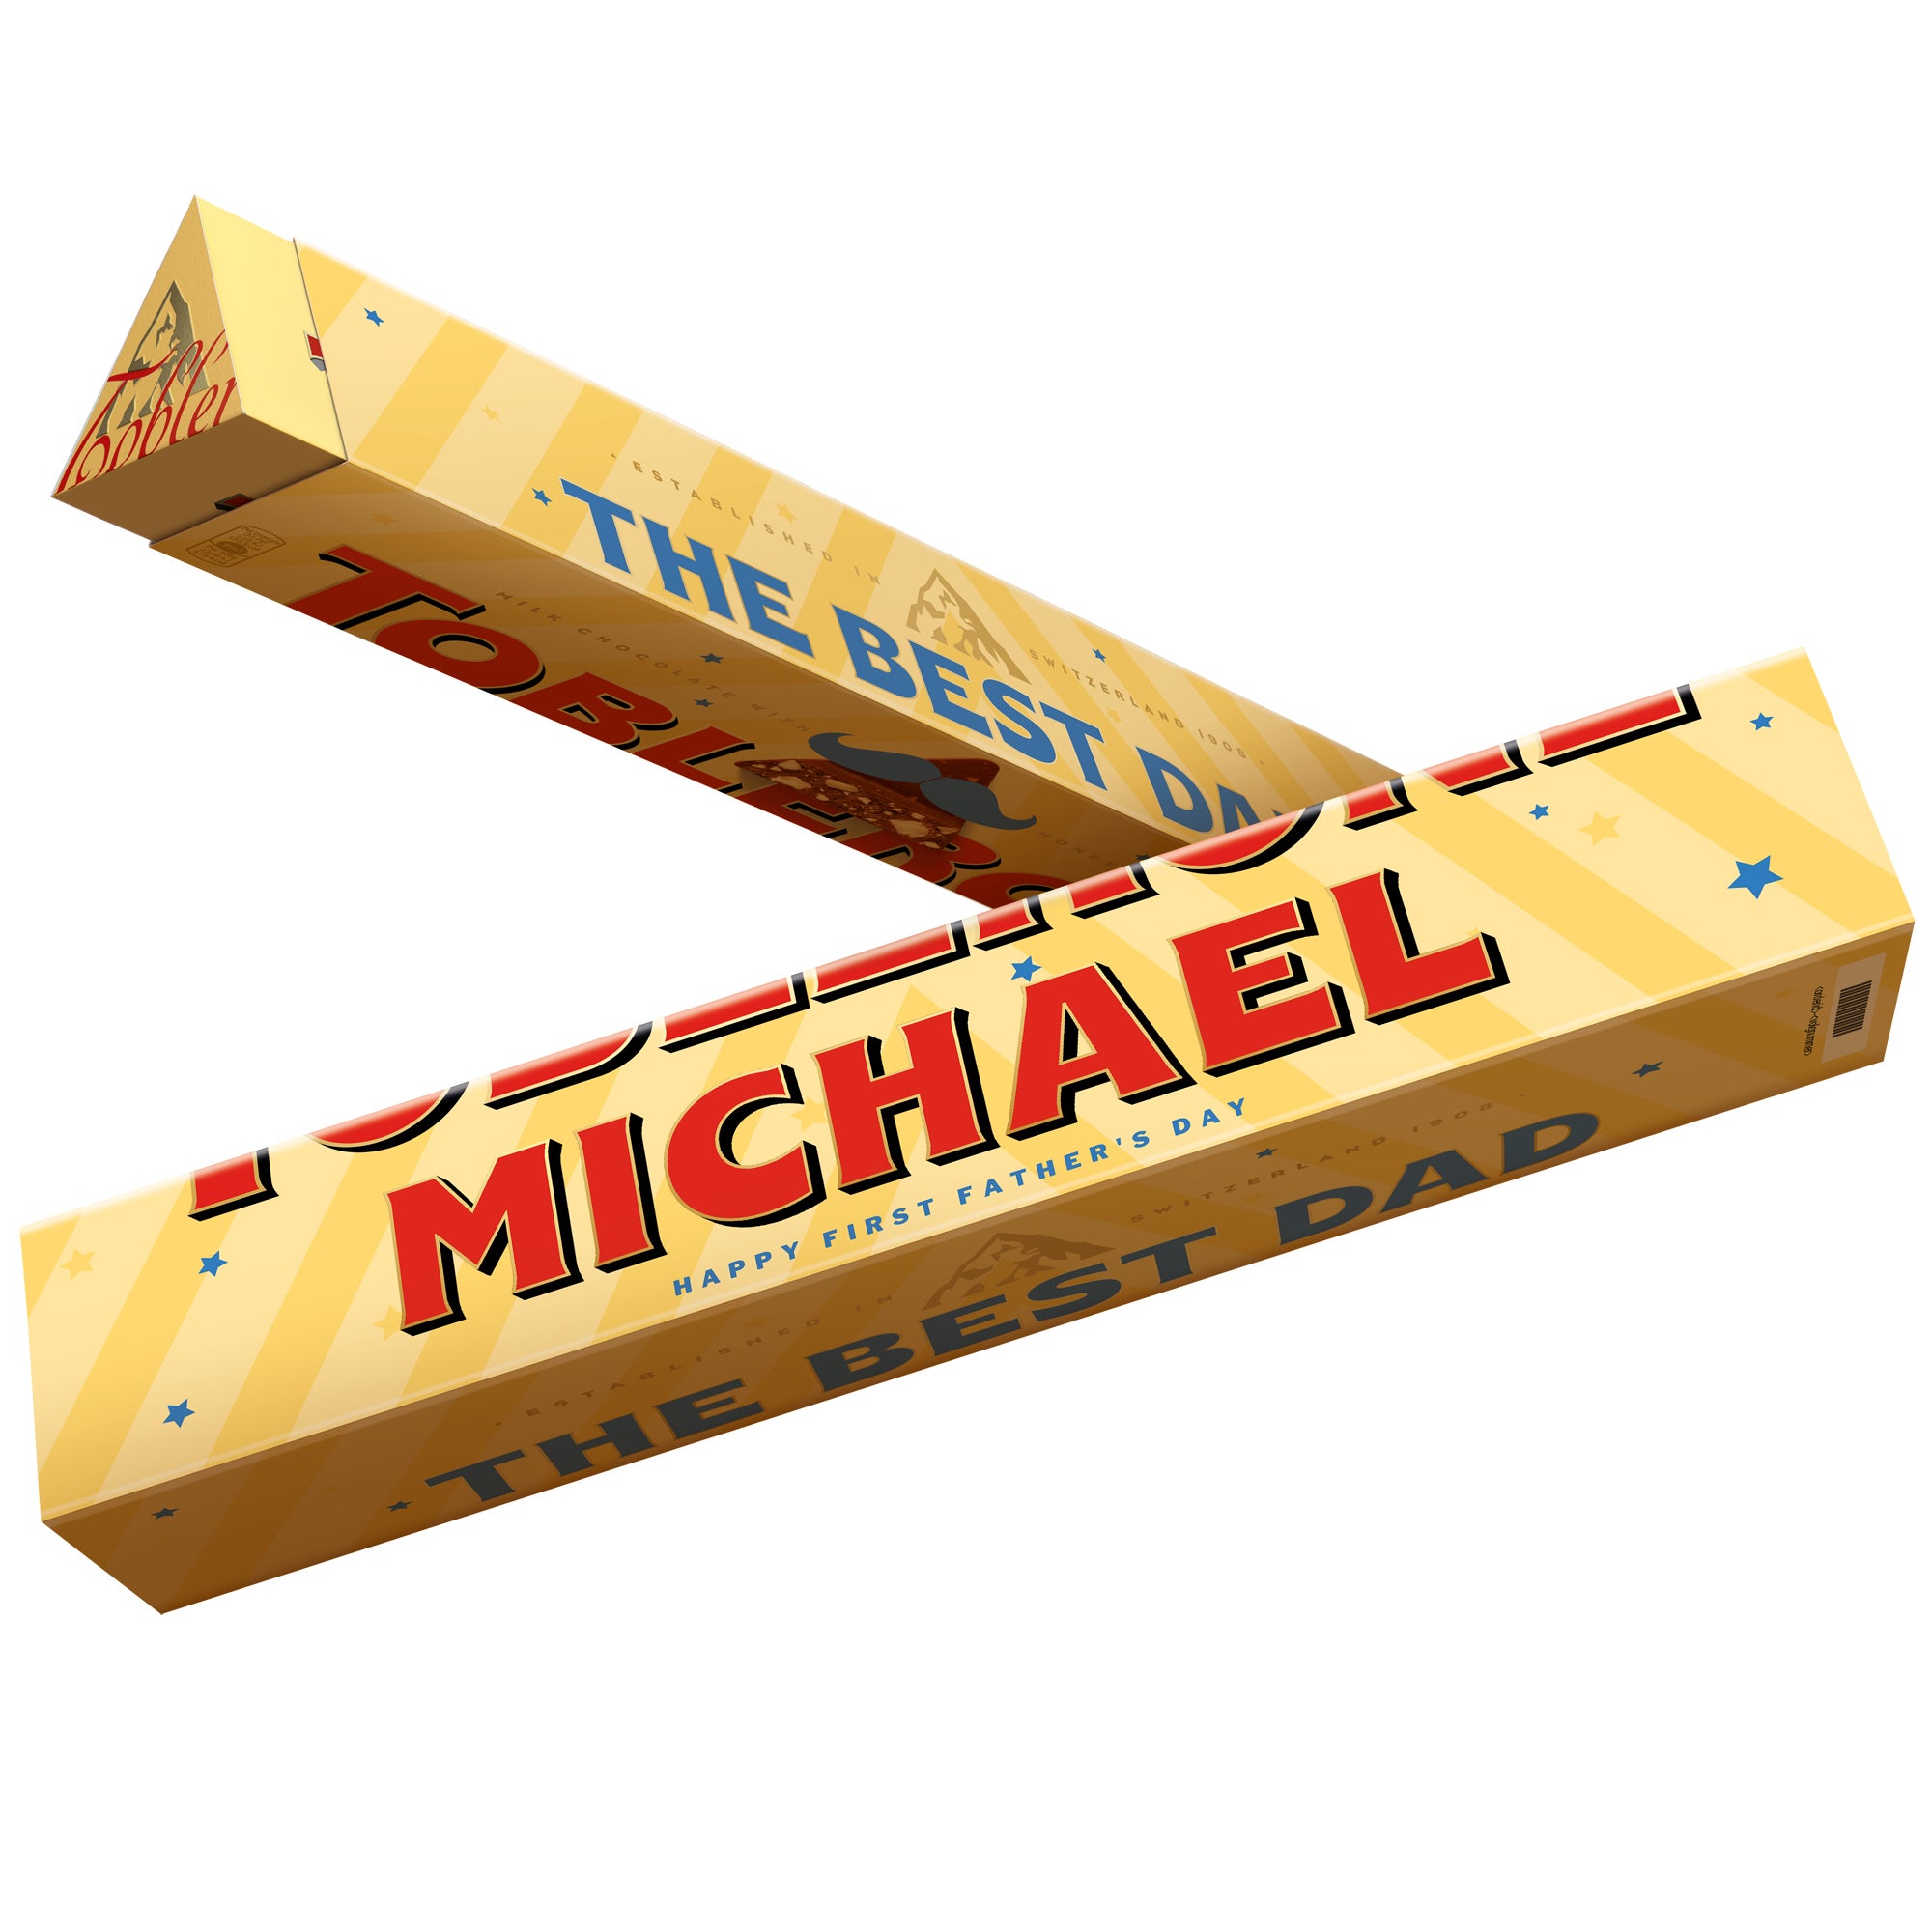 Personalised Toblerone bar - Father's Day